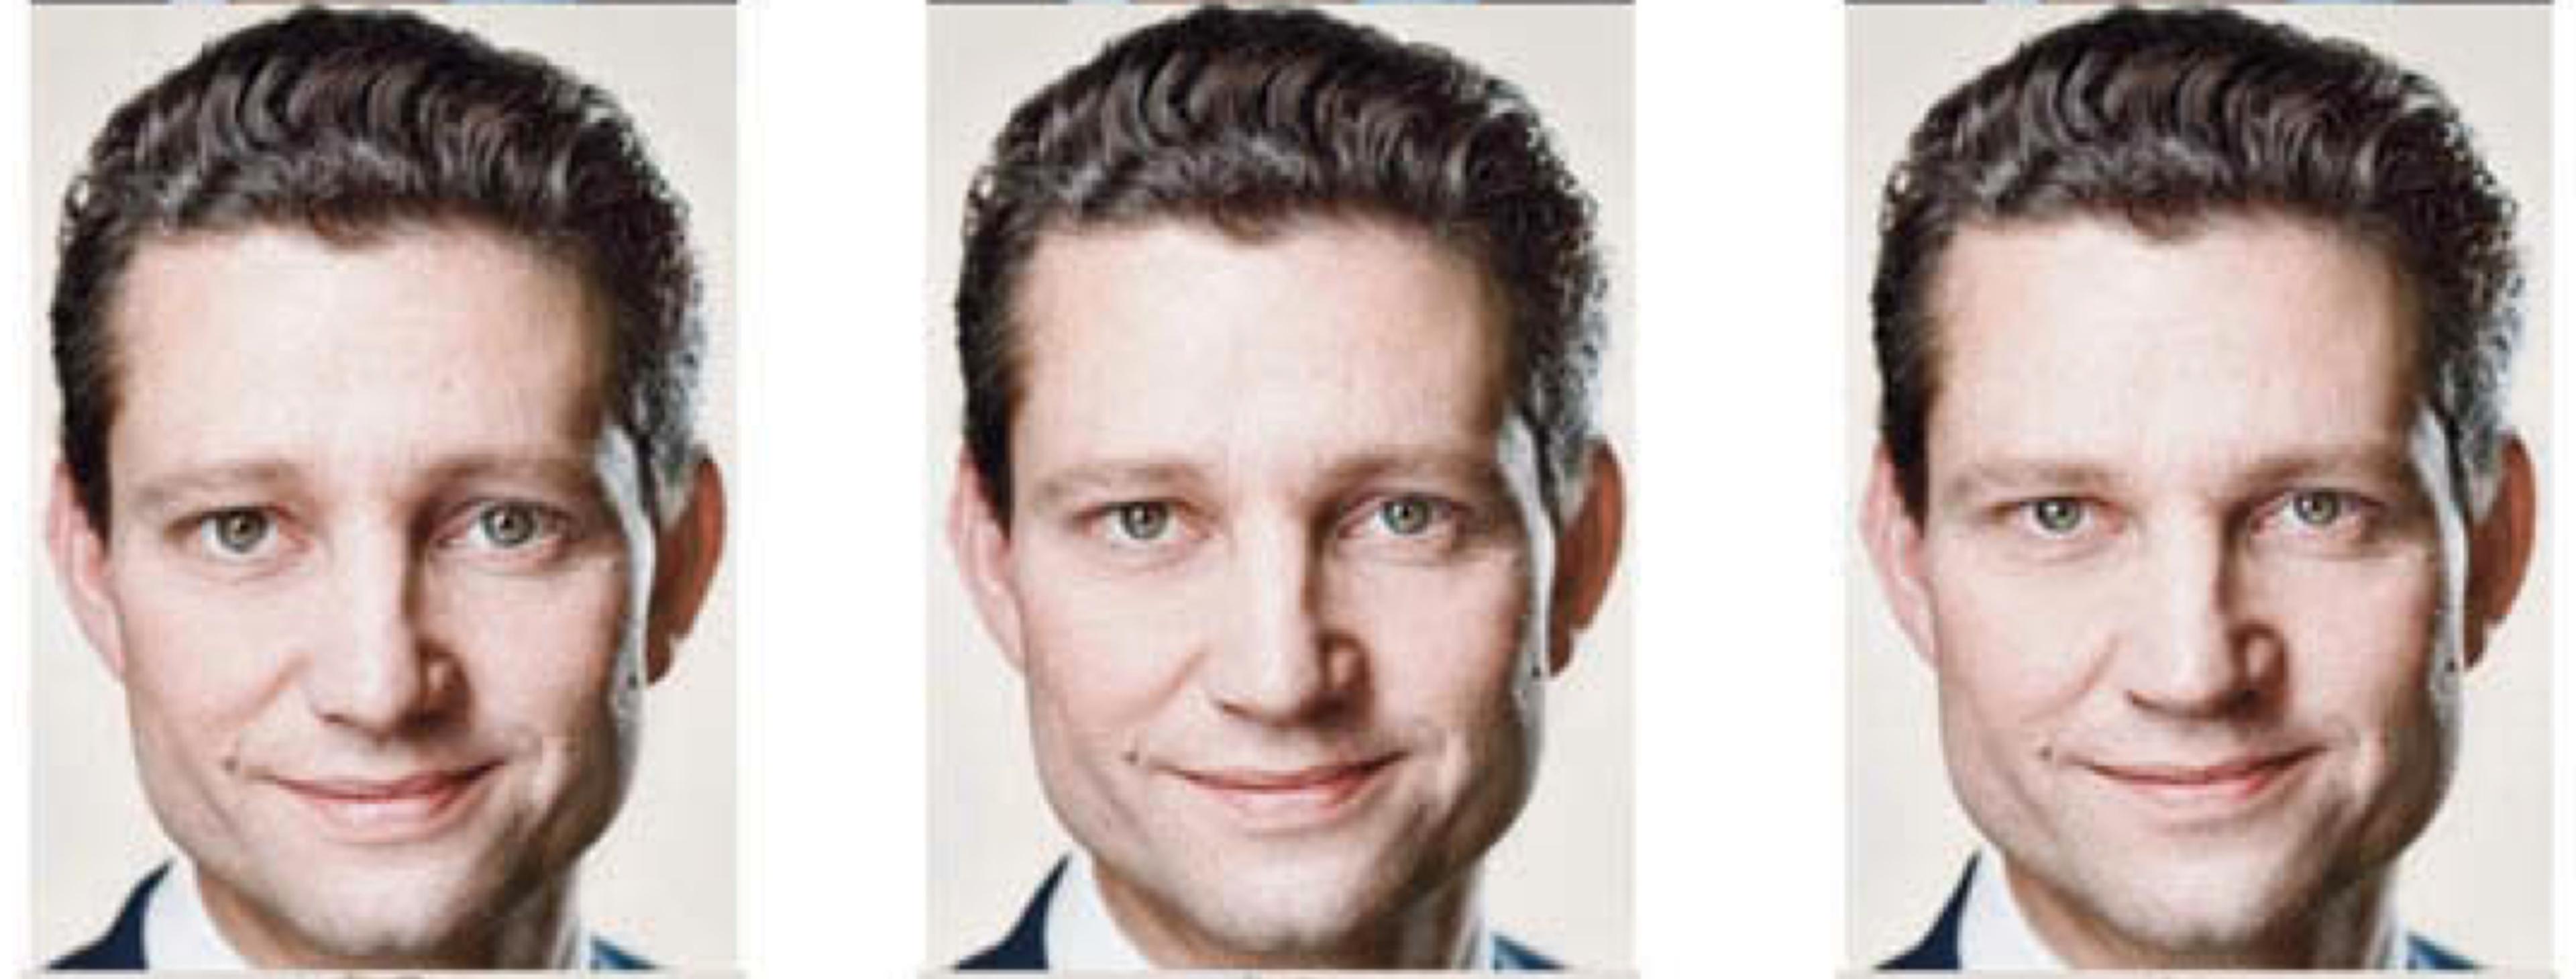 Fig. 4 A Danish politician (original image in the middle) whose face is manipulated to look less (image on the left) or more dominant (image on the right)Courtesy Lasse Lautsen